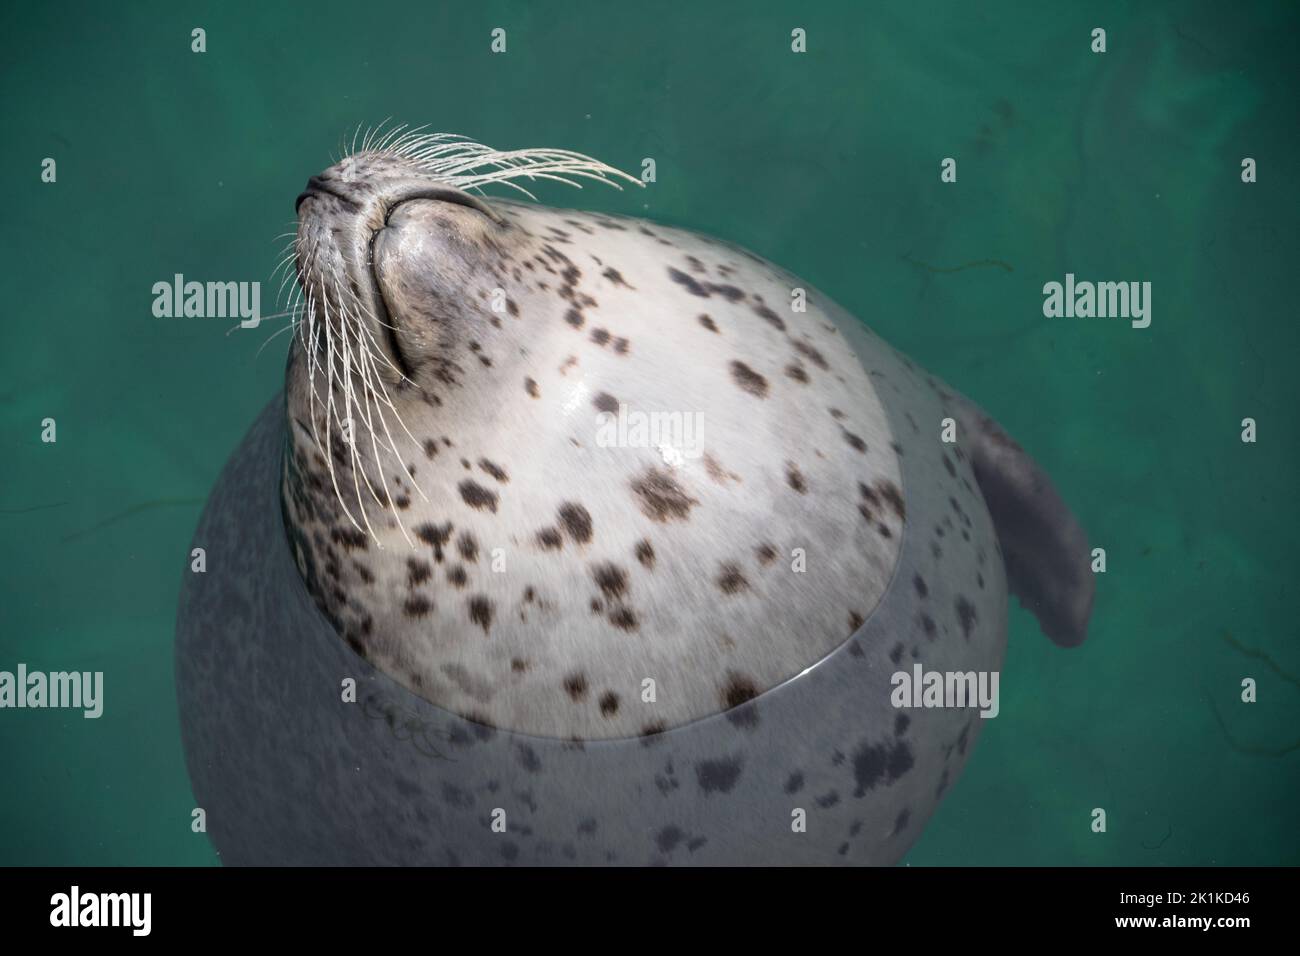 Close-up of a spotted seal sticking its head out of the sea, Spain Stock Photo